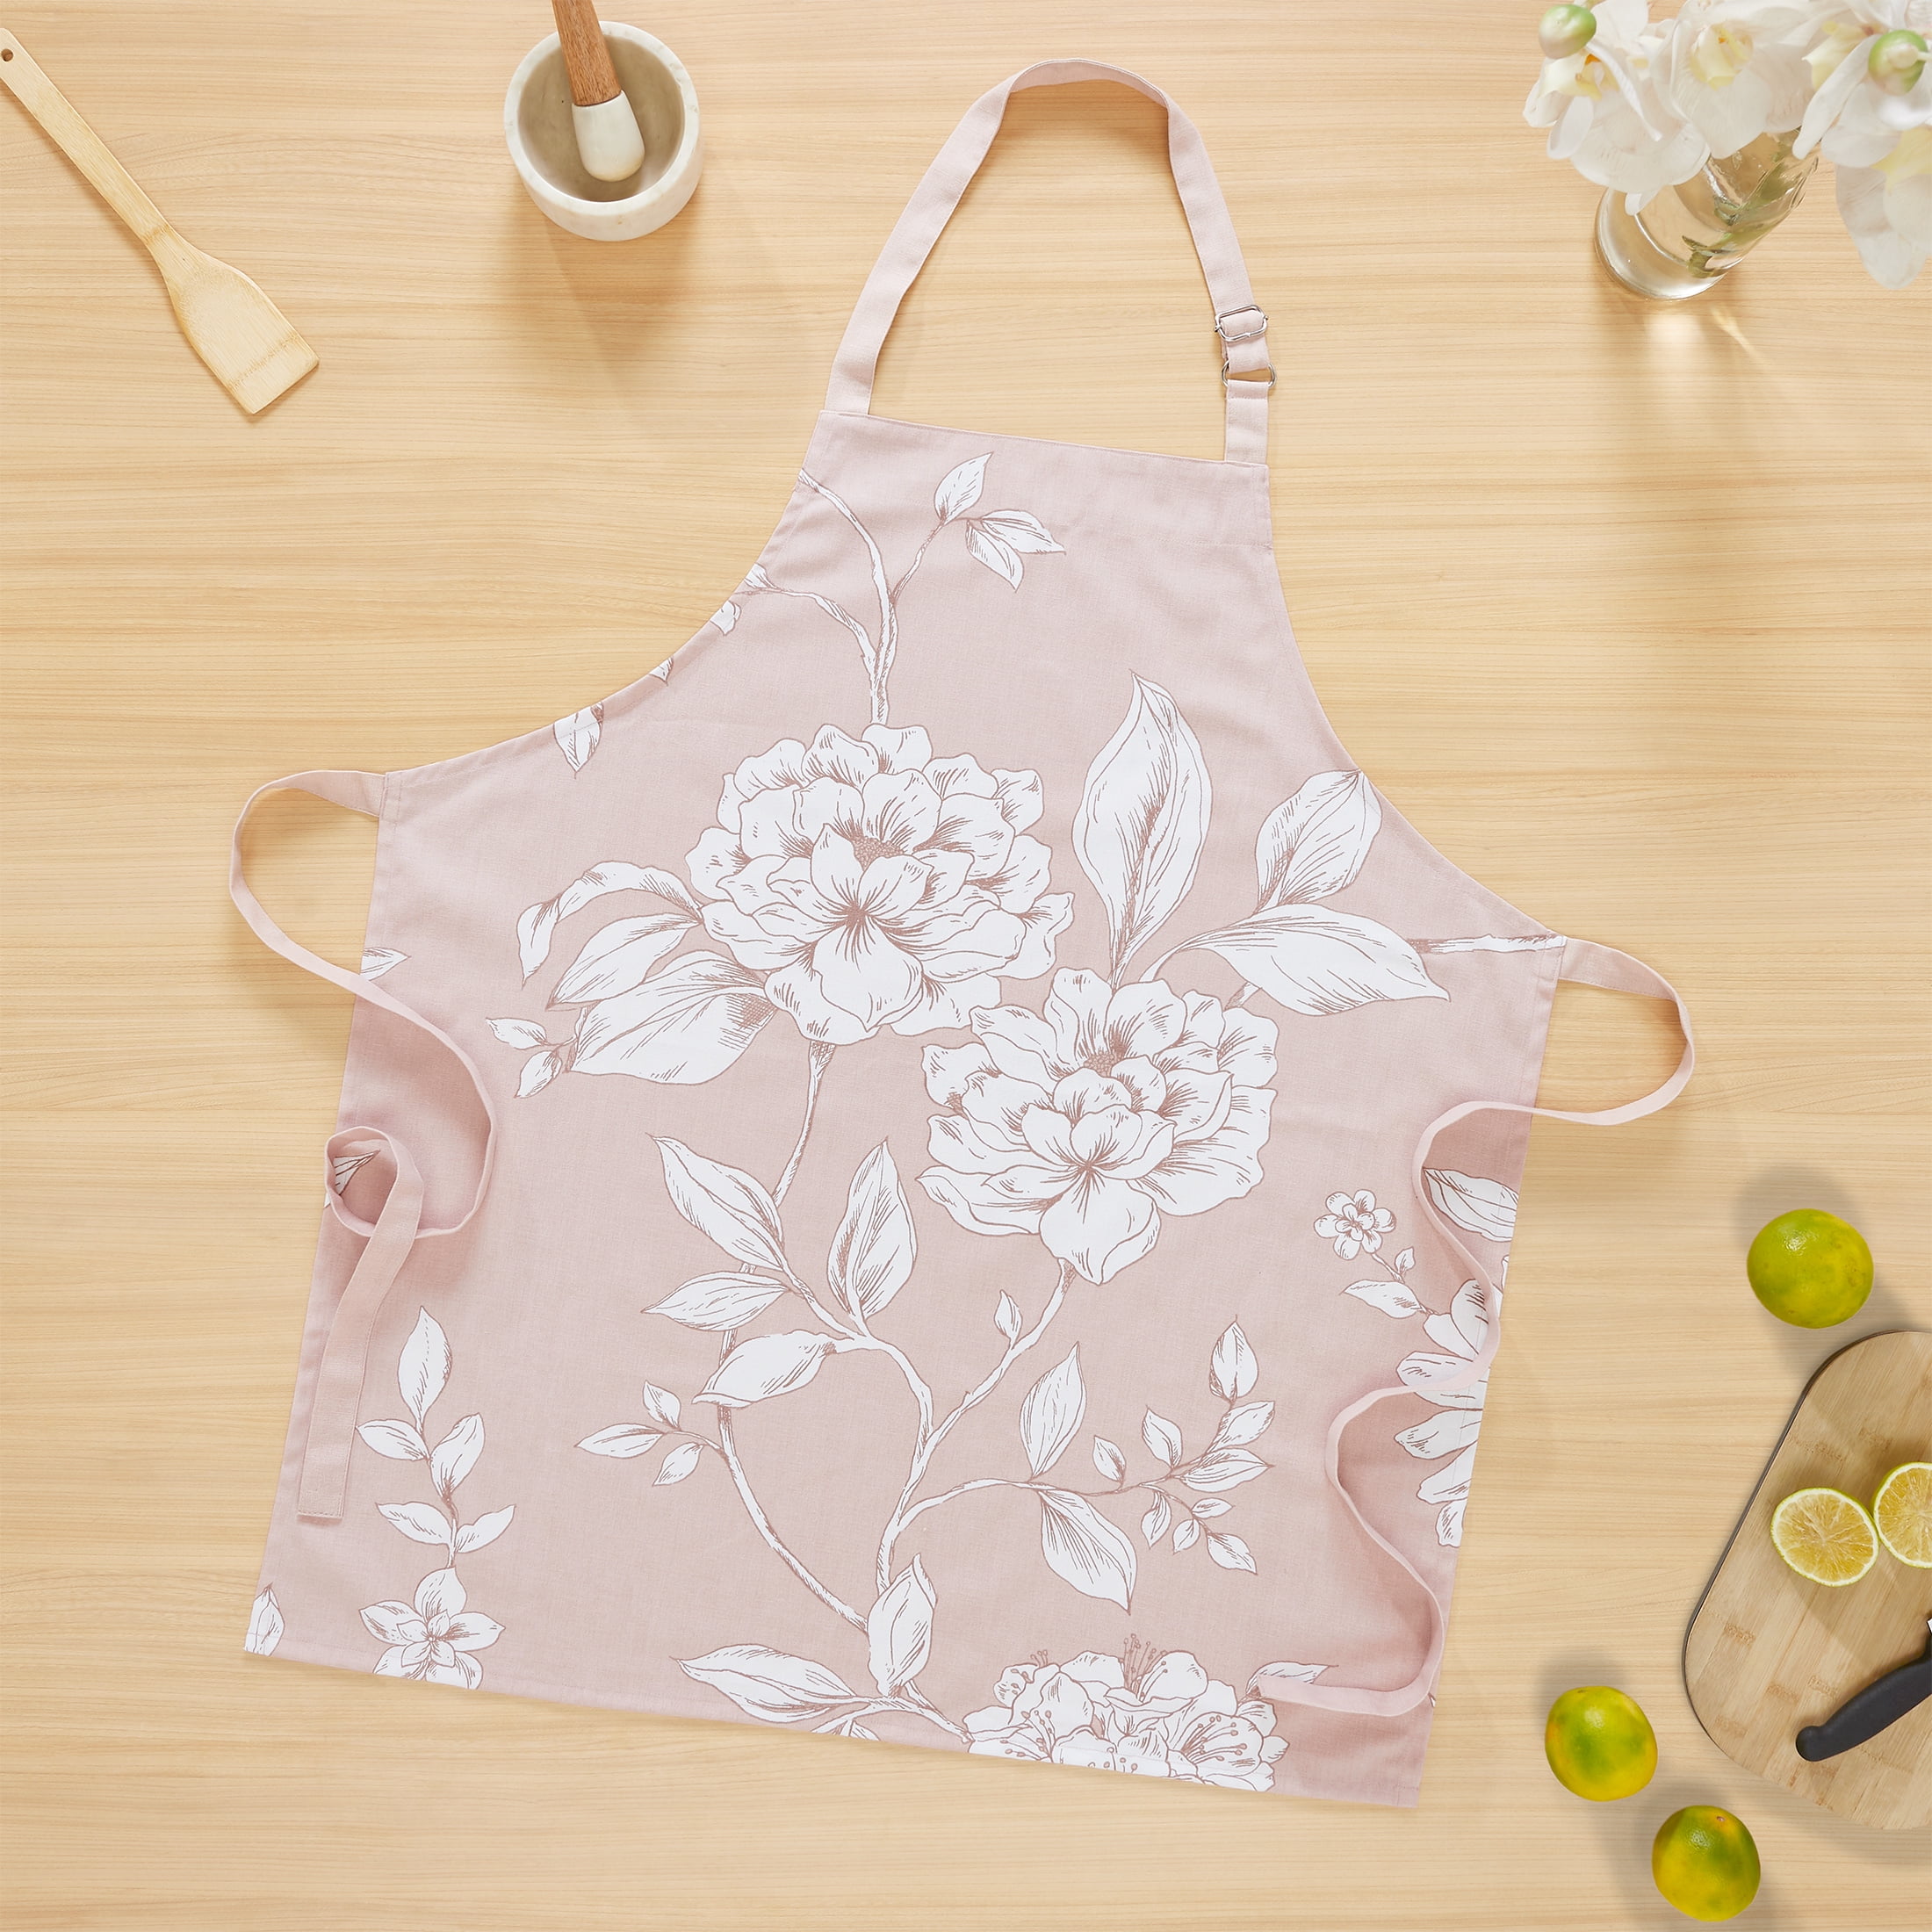 My Texas House Polyester/Cotton 30" x 54" Oversized Floral Printed Apron, Blush